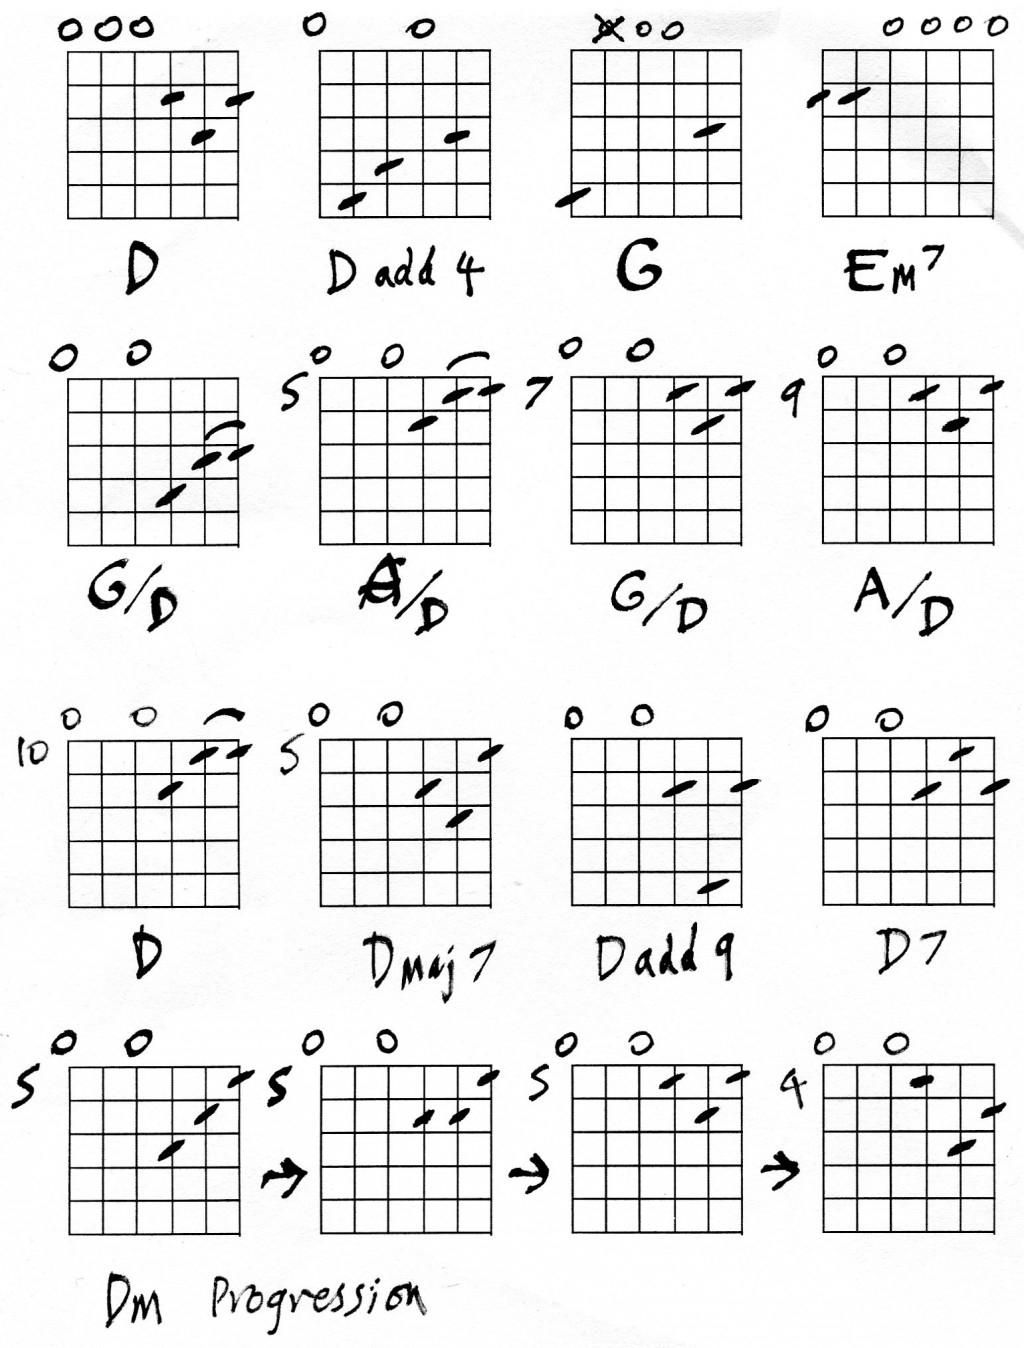 Em7 Guitar Chord Guitar Lesson Guitar Chords In Drop D Open C And Open G Spinditty